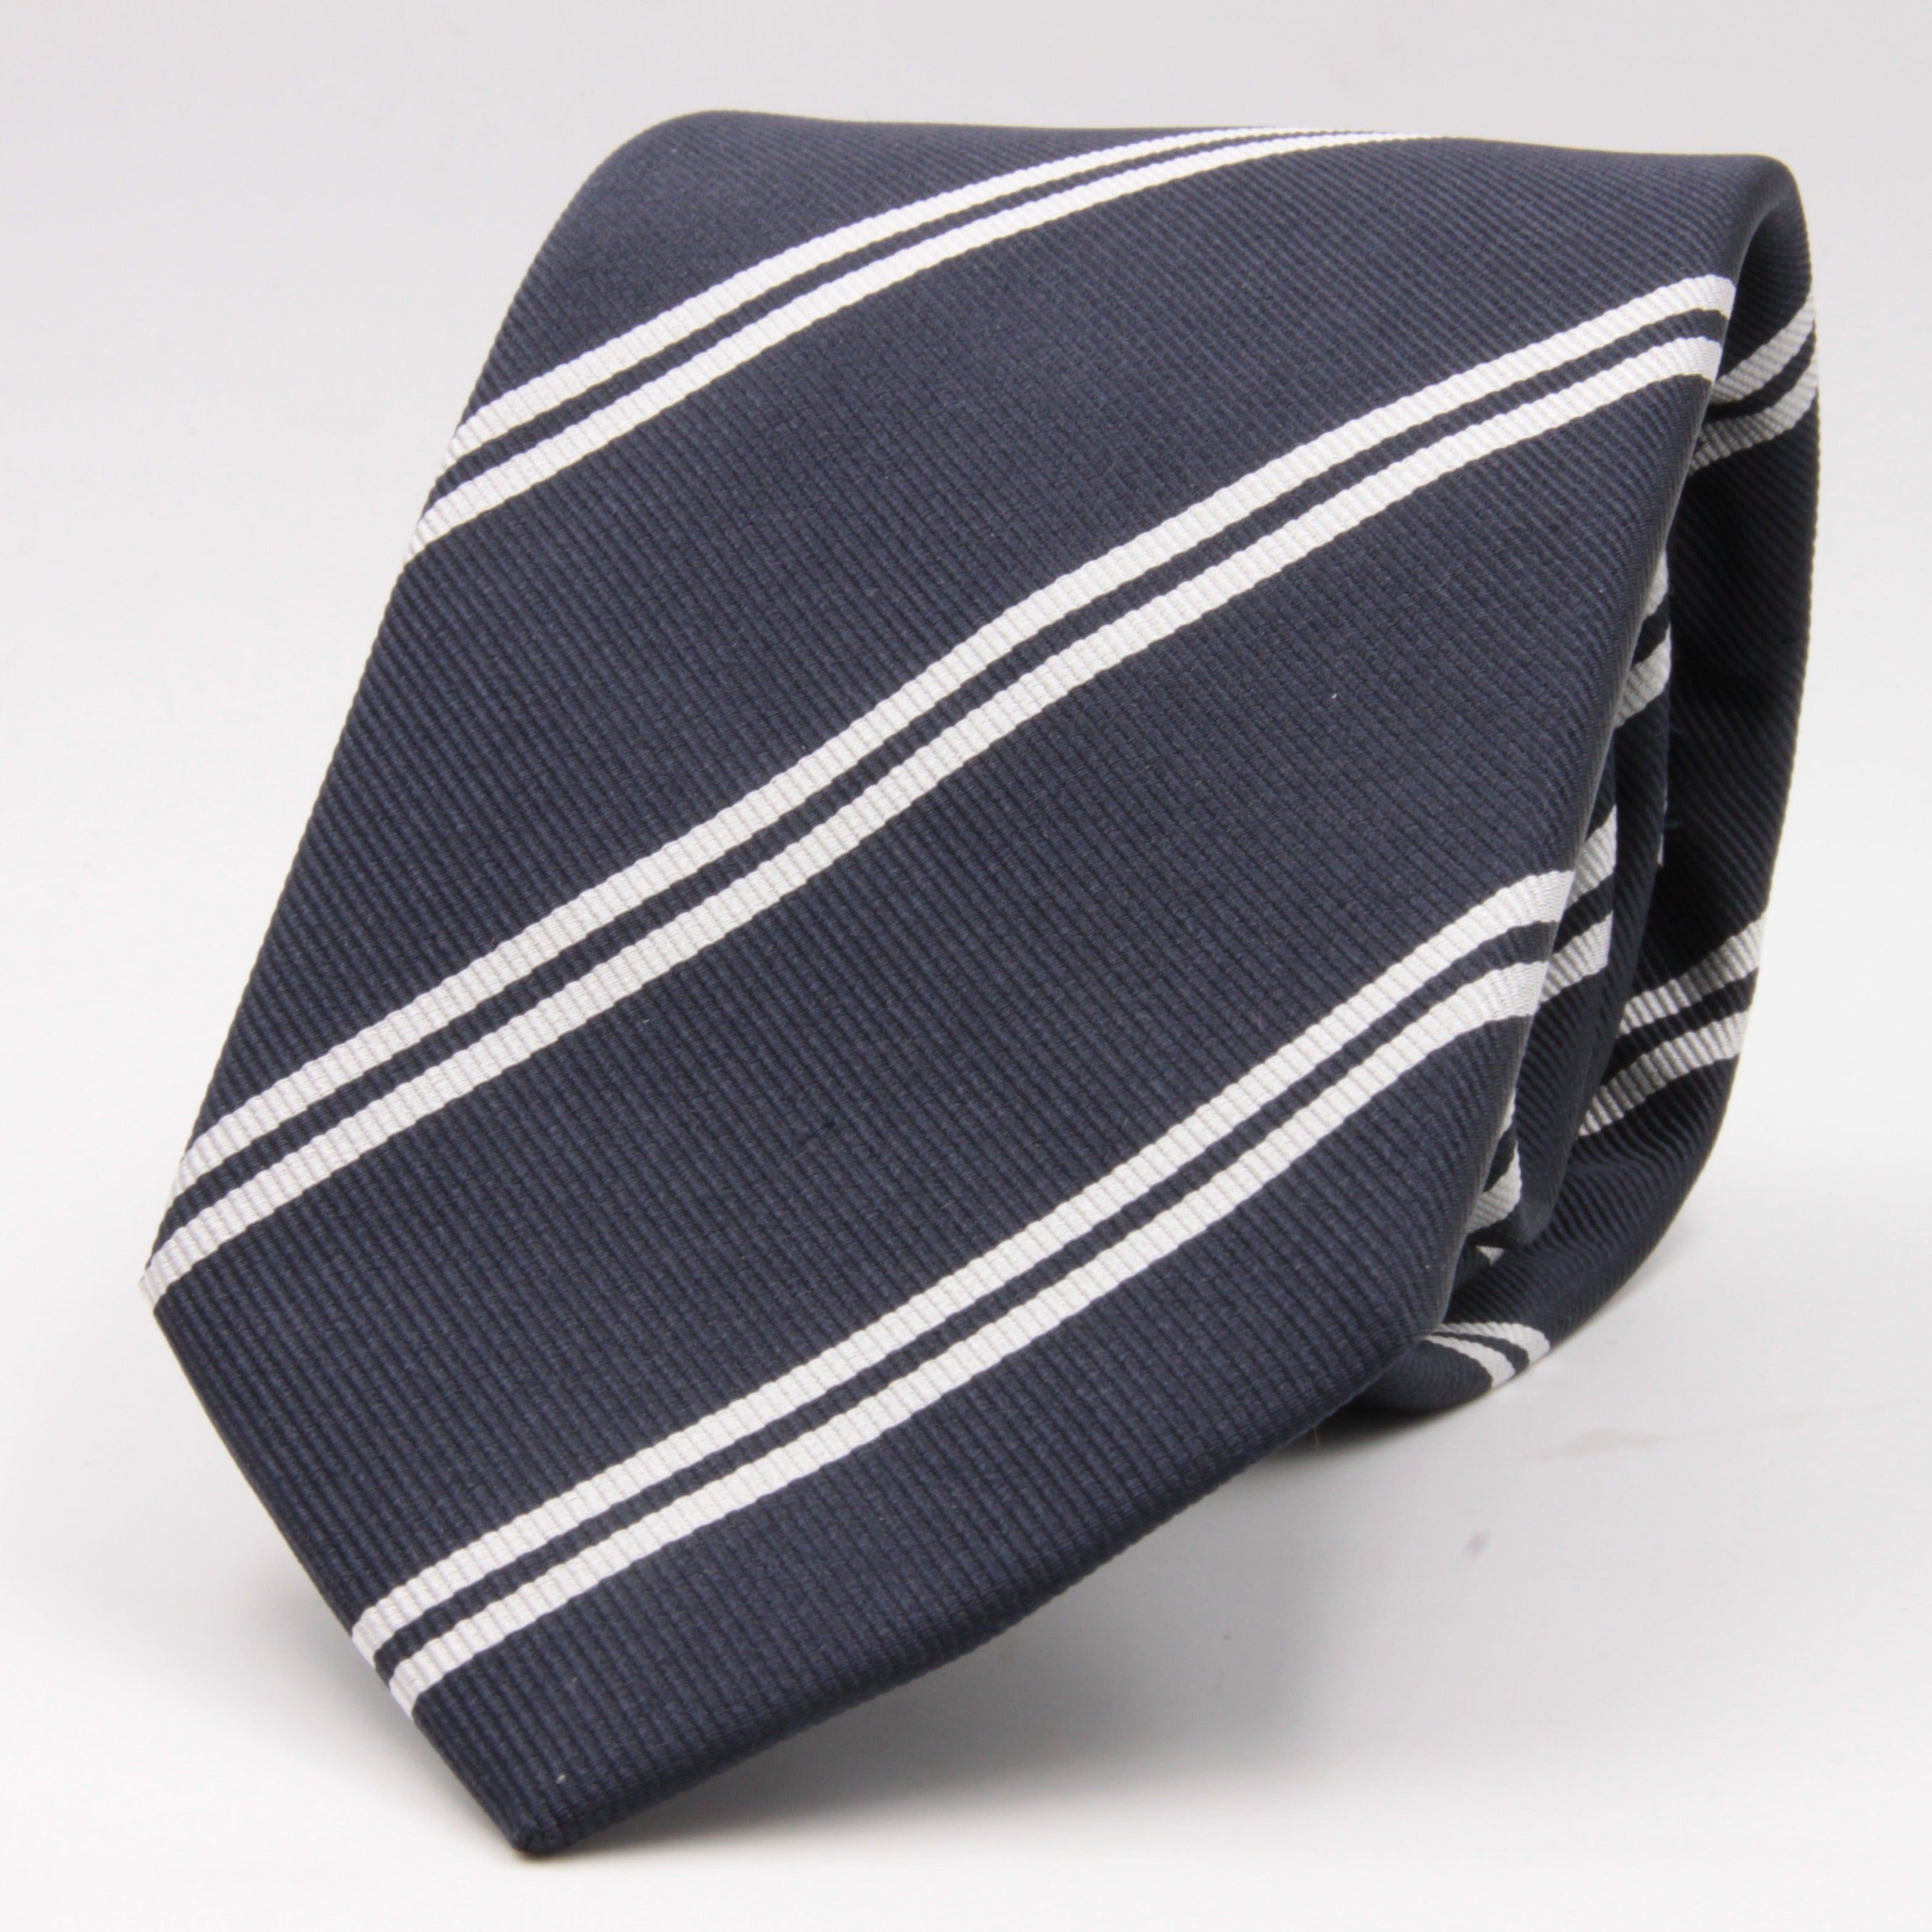 Holliday & Brown for Cruciani & Bella 100% Silk Jacquard  Regimental "Old Harovians" Blue and white stripe tie Handmade in Italy 8 cm x 150 cm